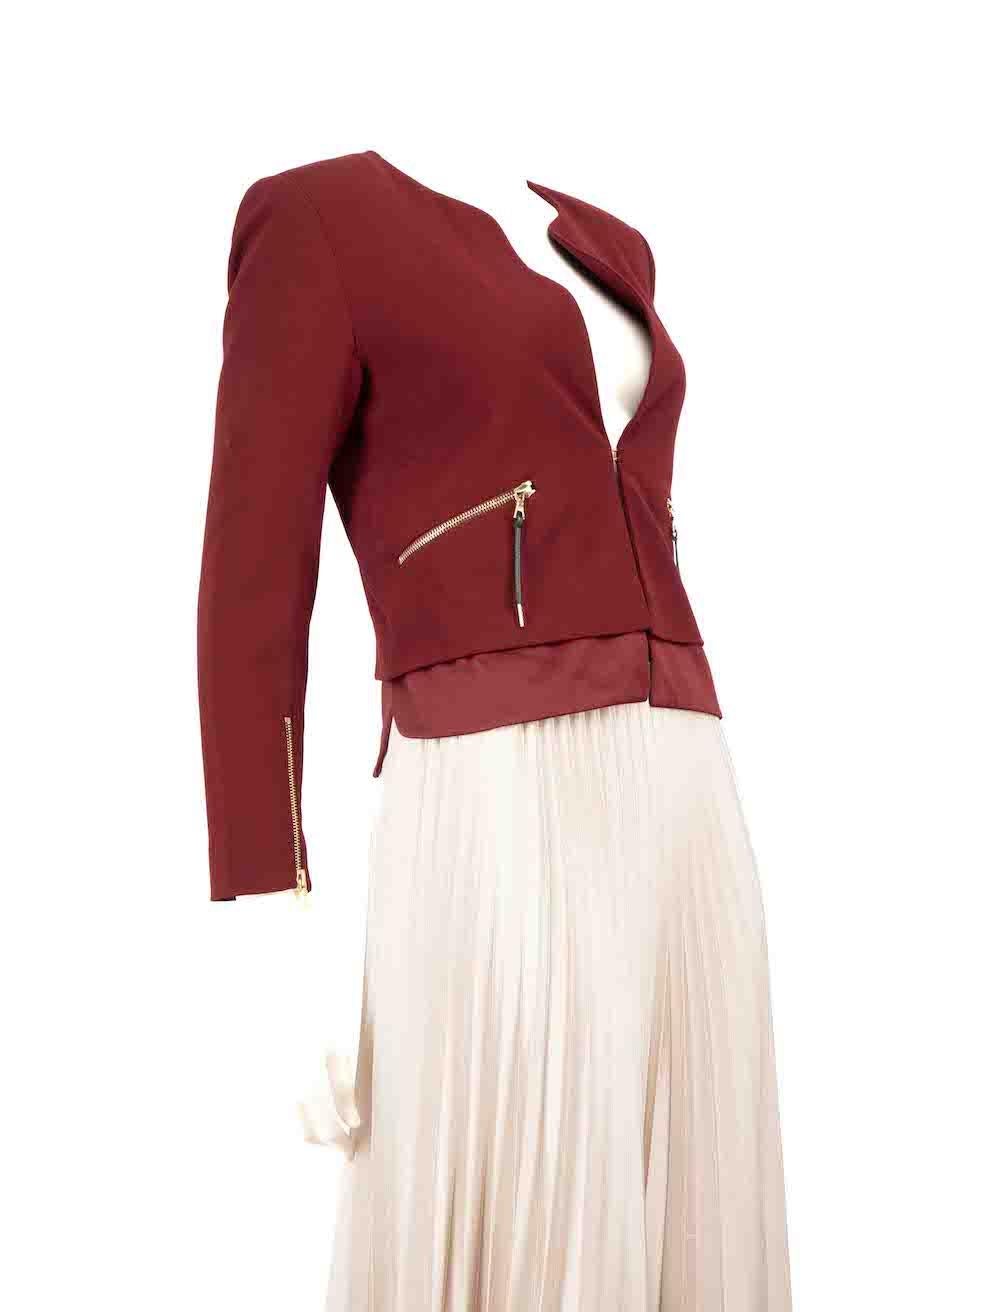 CONDITION is Very good. Minimal wear to the jacket is evident. Minimal wear to the front is seen with a pen mark above the pocket and a pull in the left shoulder's weave on this used Sandro designer resale item.
 
 
 
 Details
 
 
 Burgundy
 
